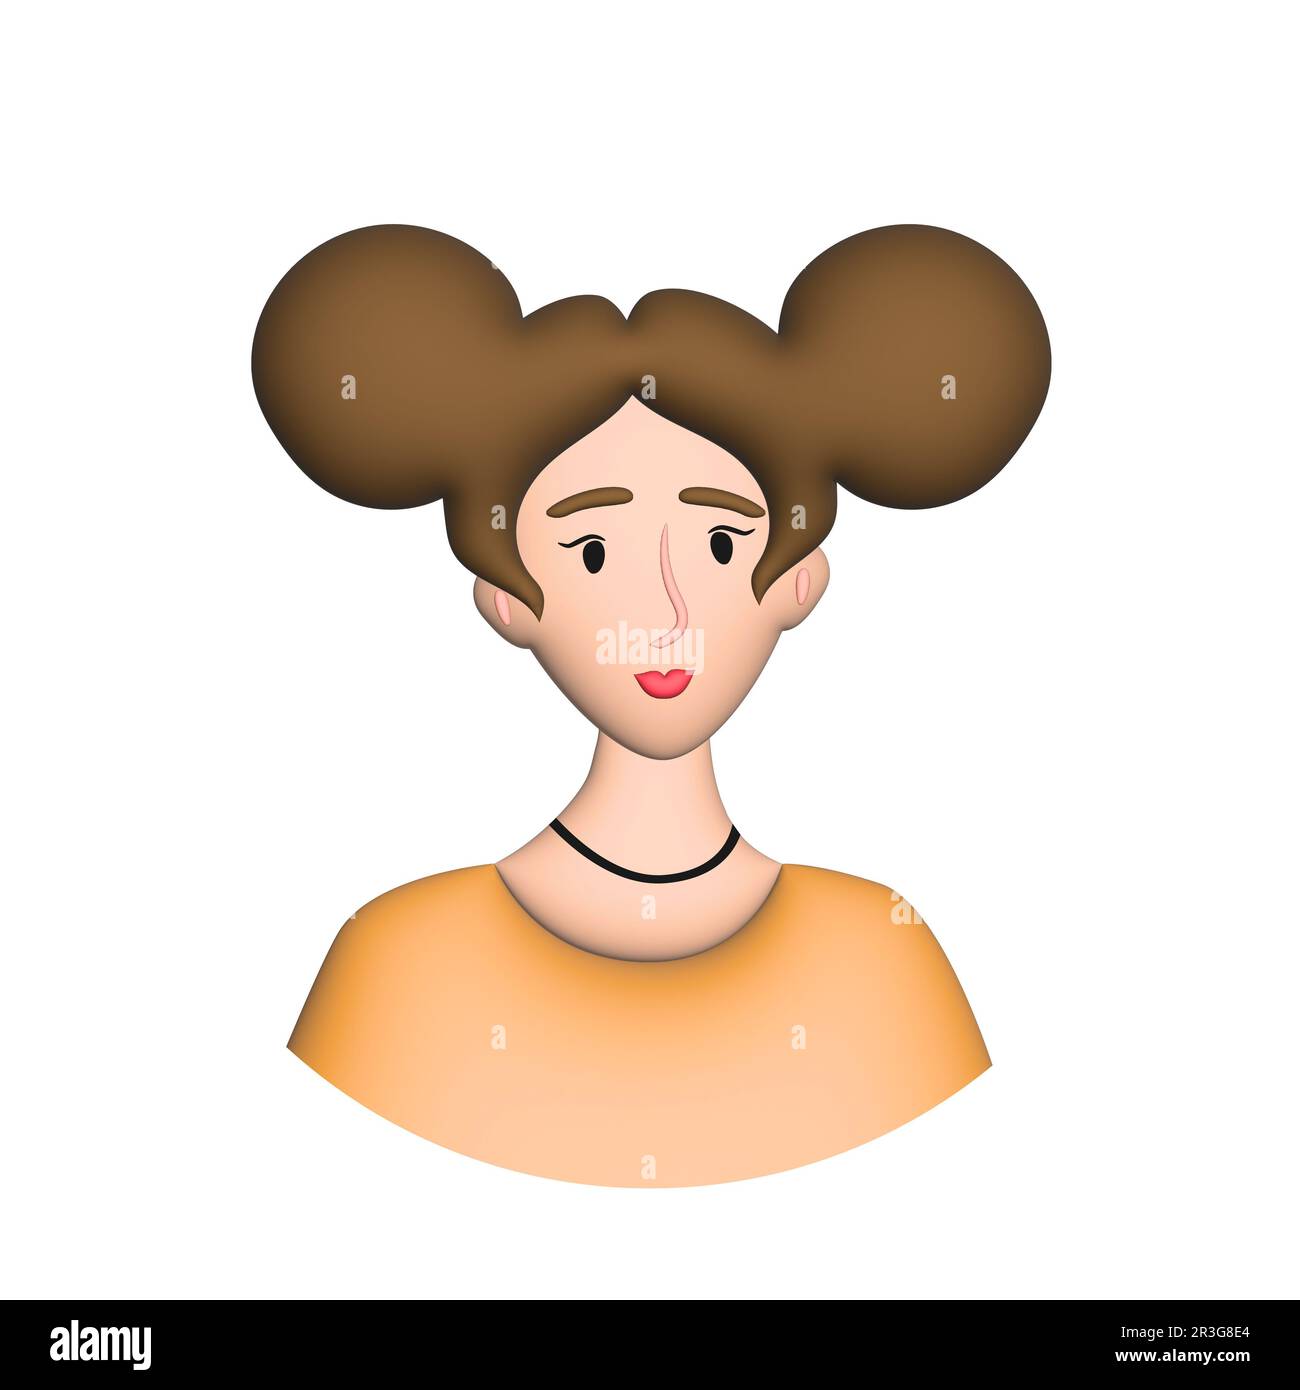 Web icon man, girl with two pigtails Stock Photo